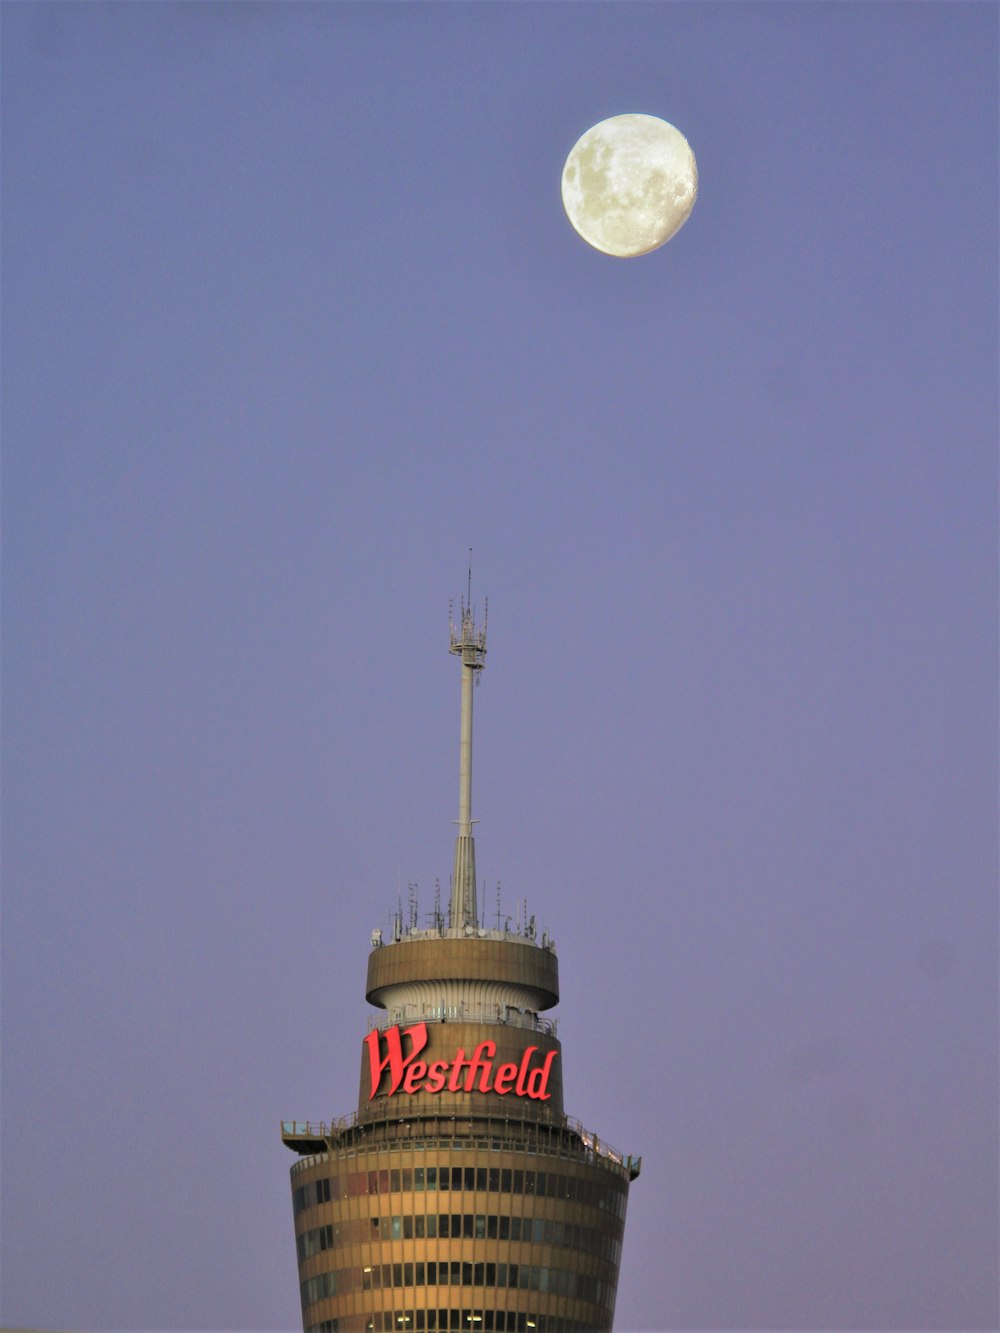 red and white tower under full moon